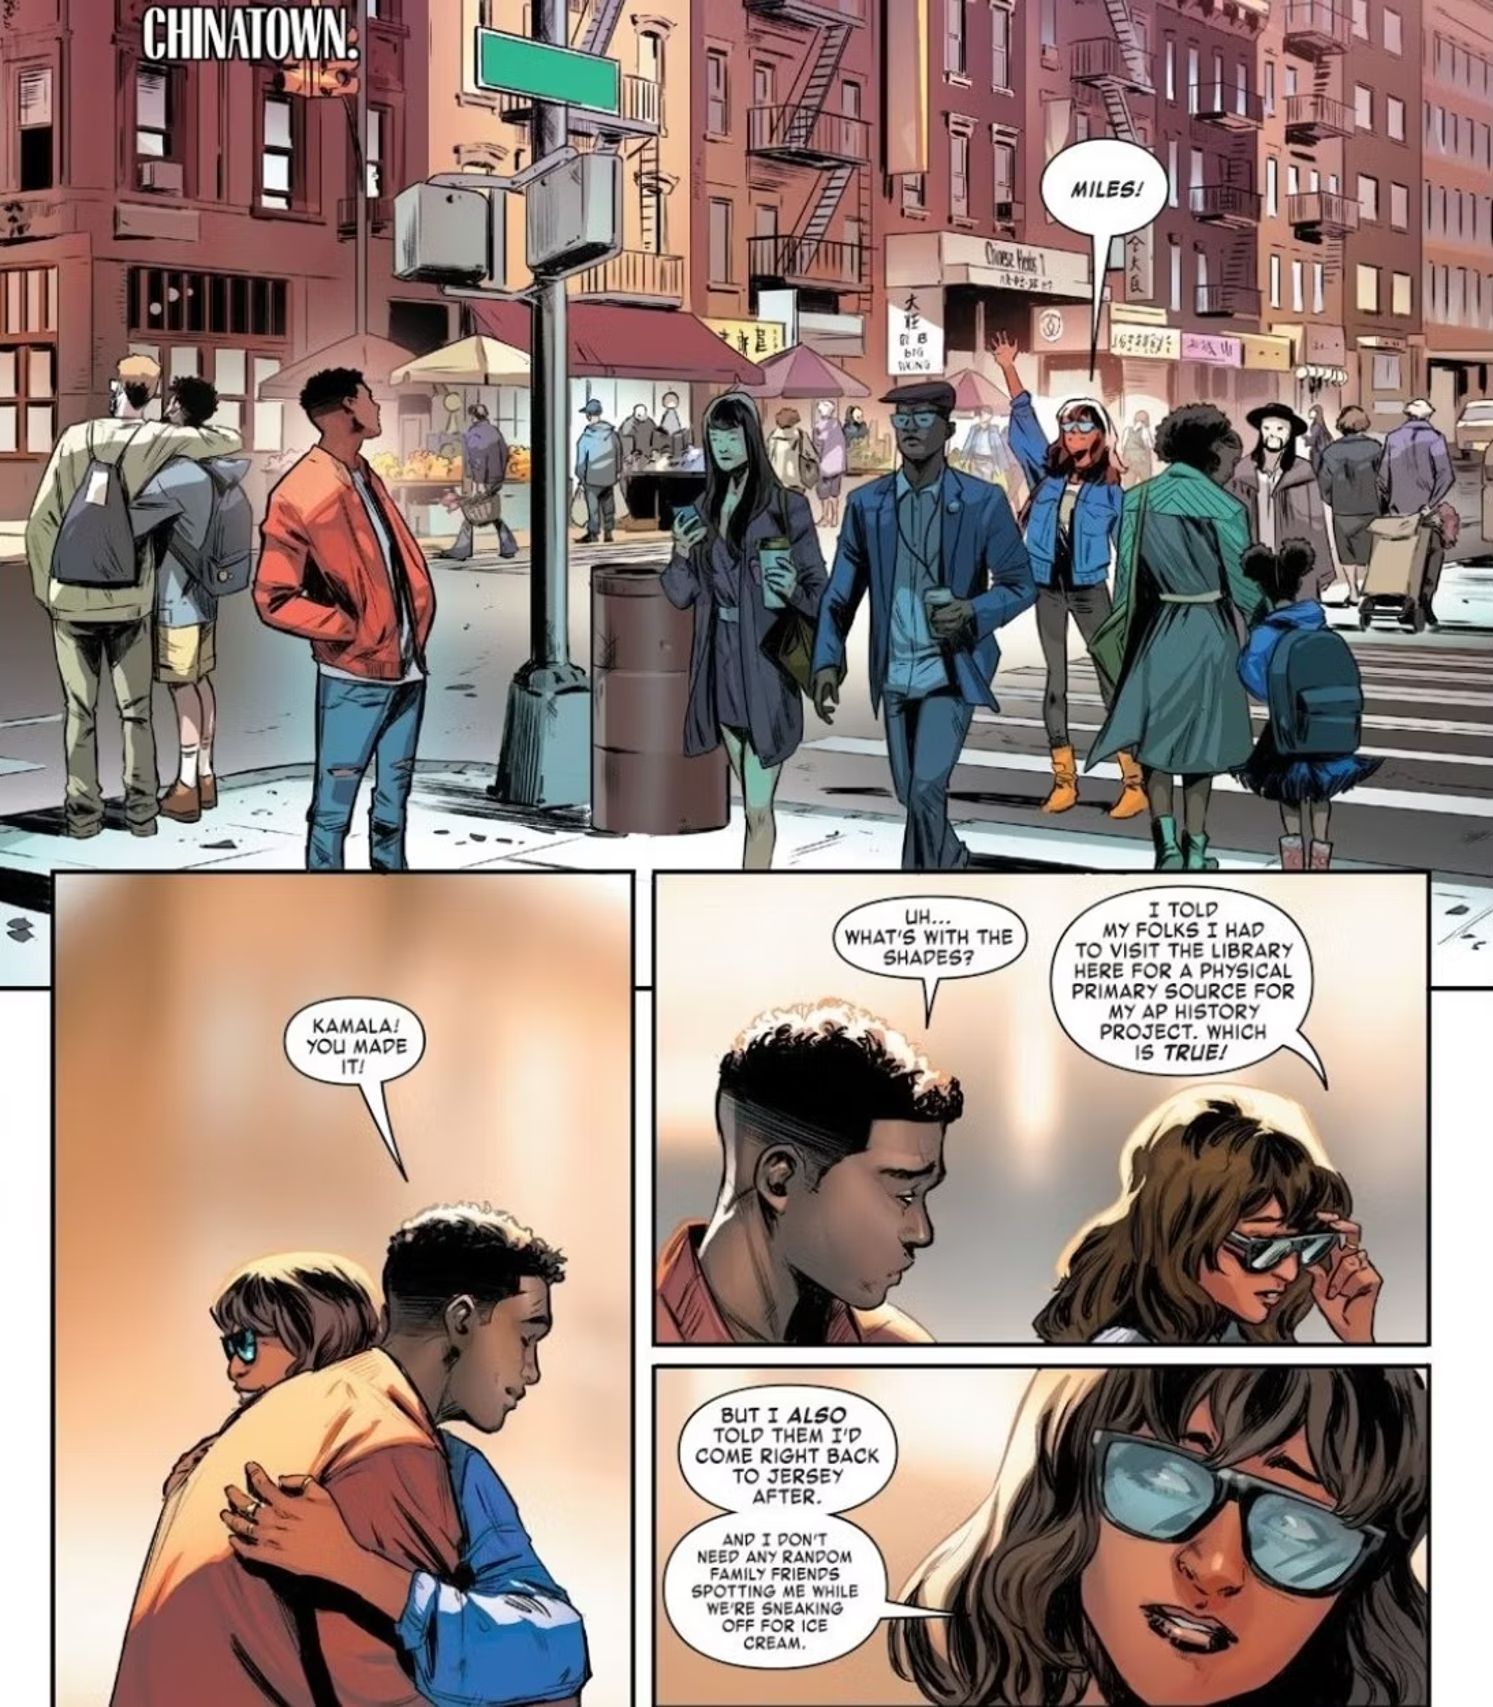 Miles Morales and Kamala Khan meet up in the city to hang out